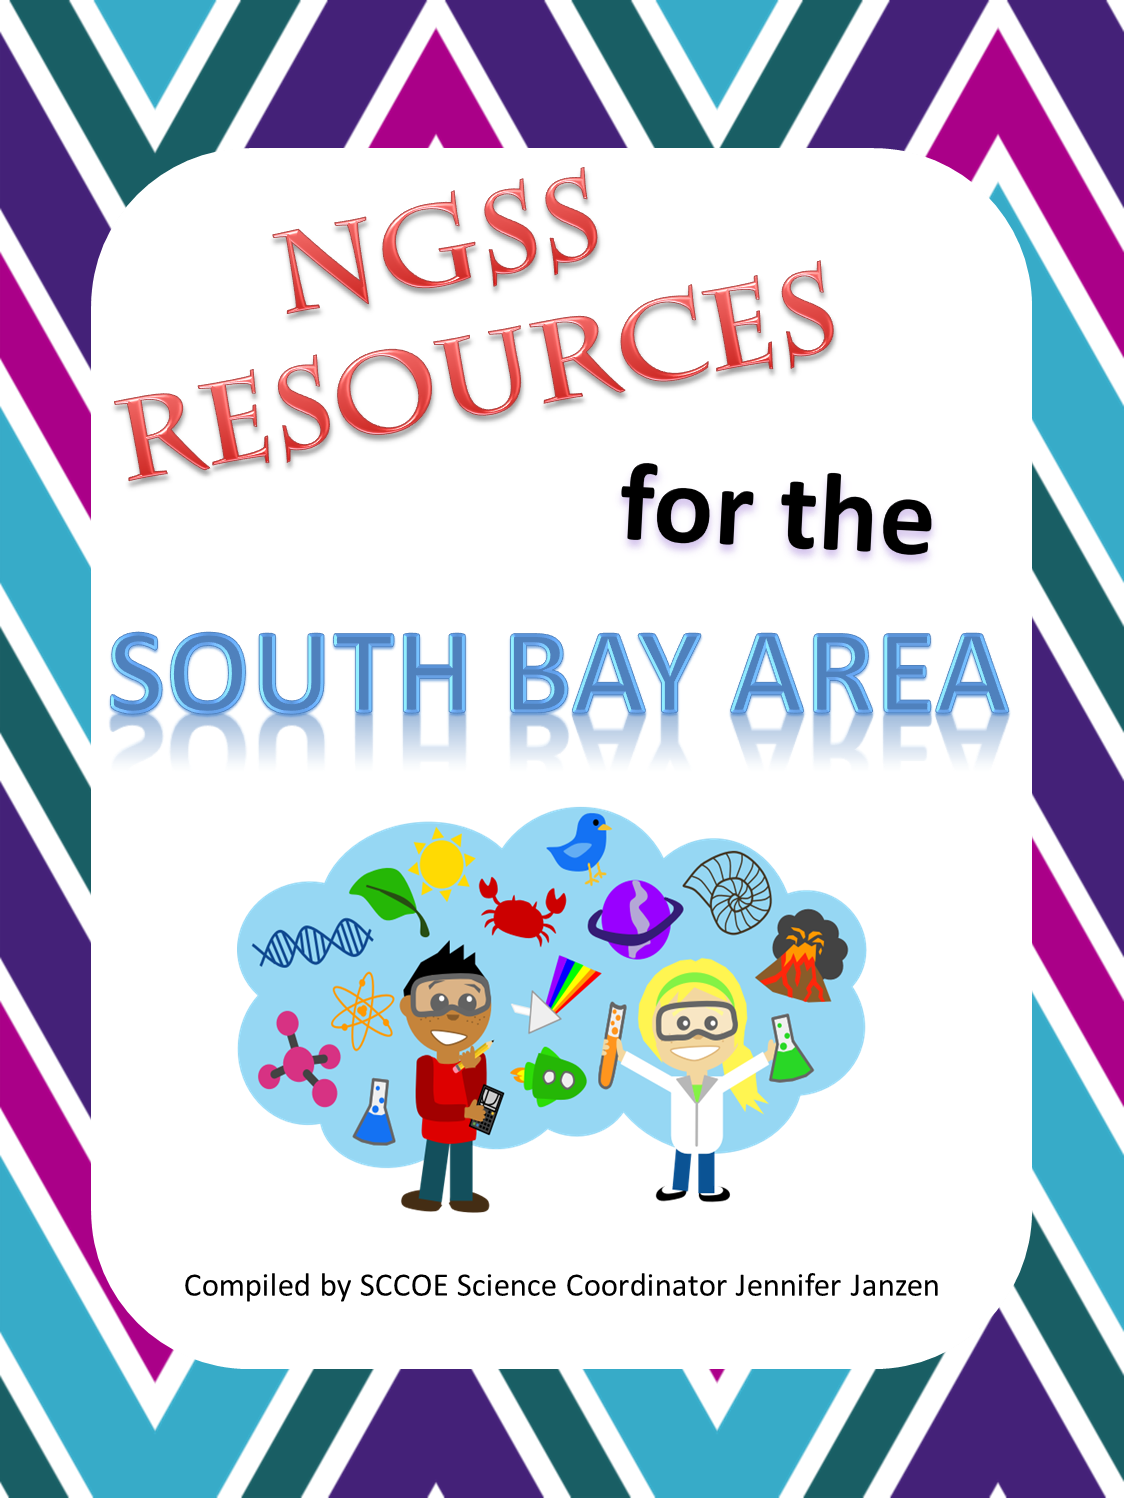 NGSS Resources